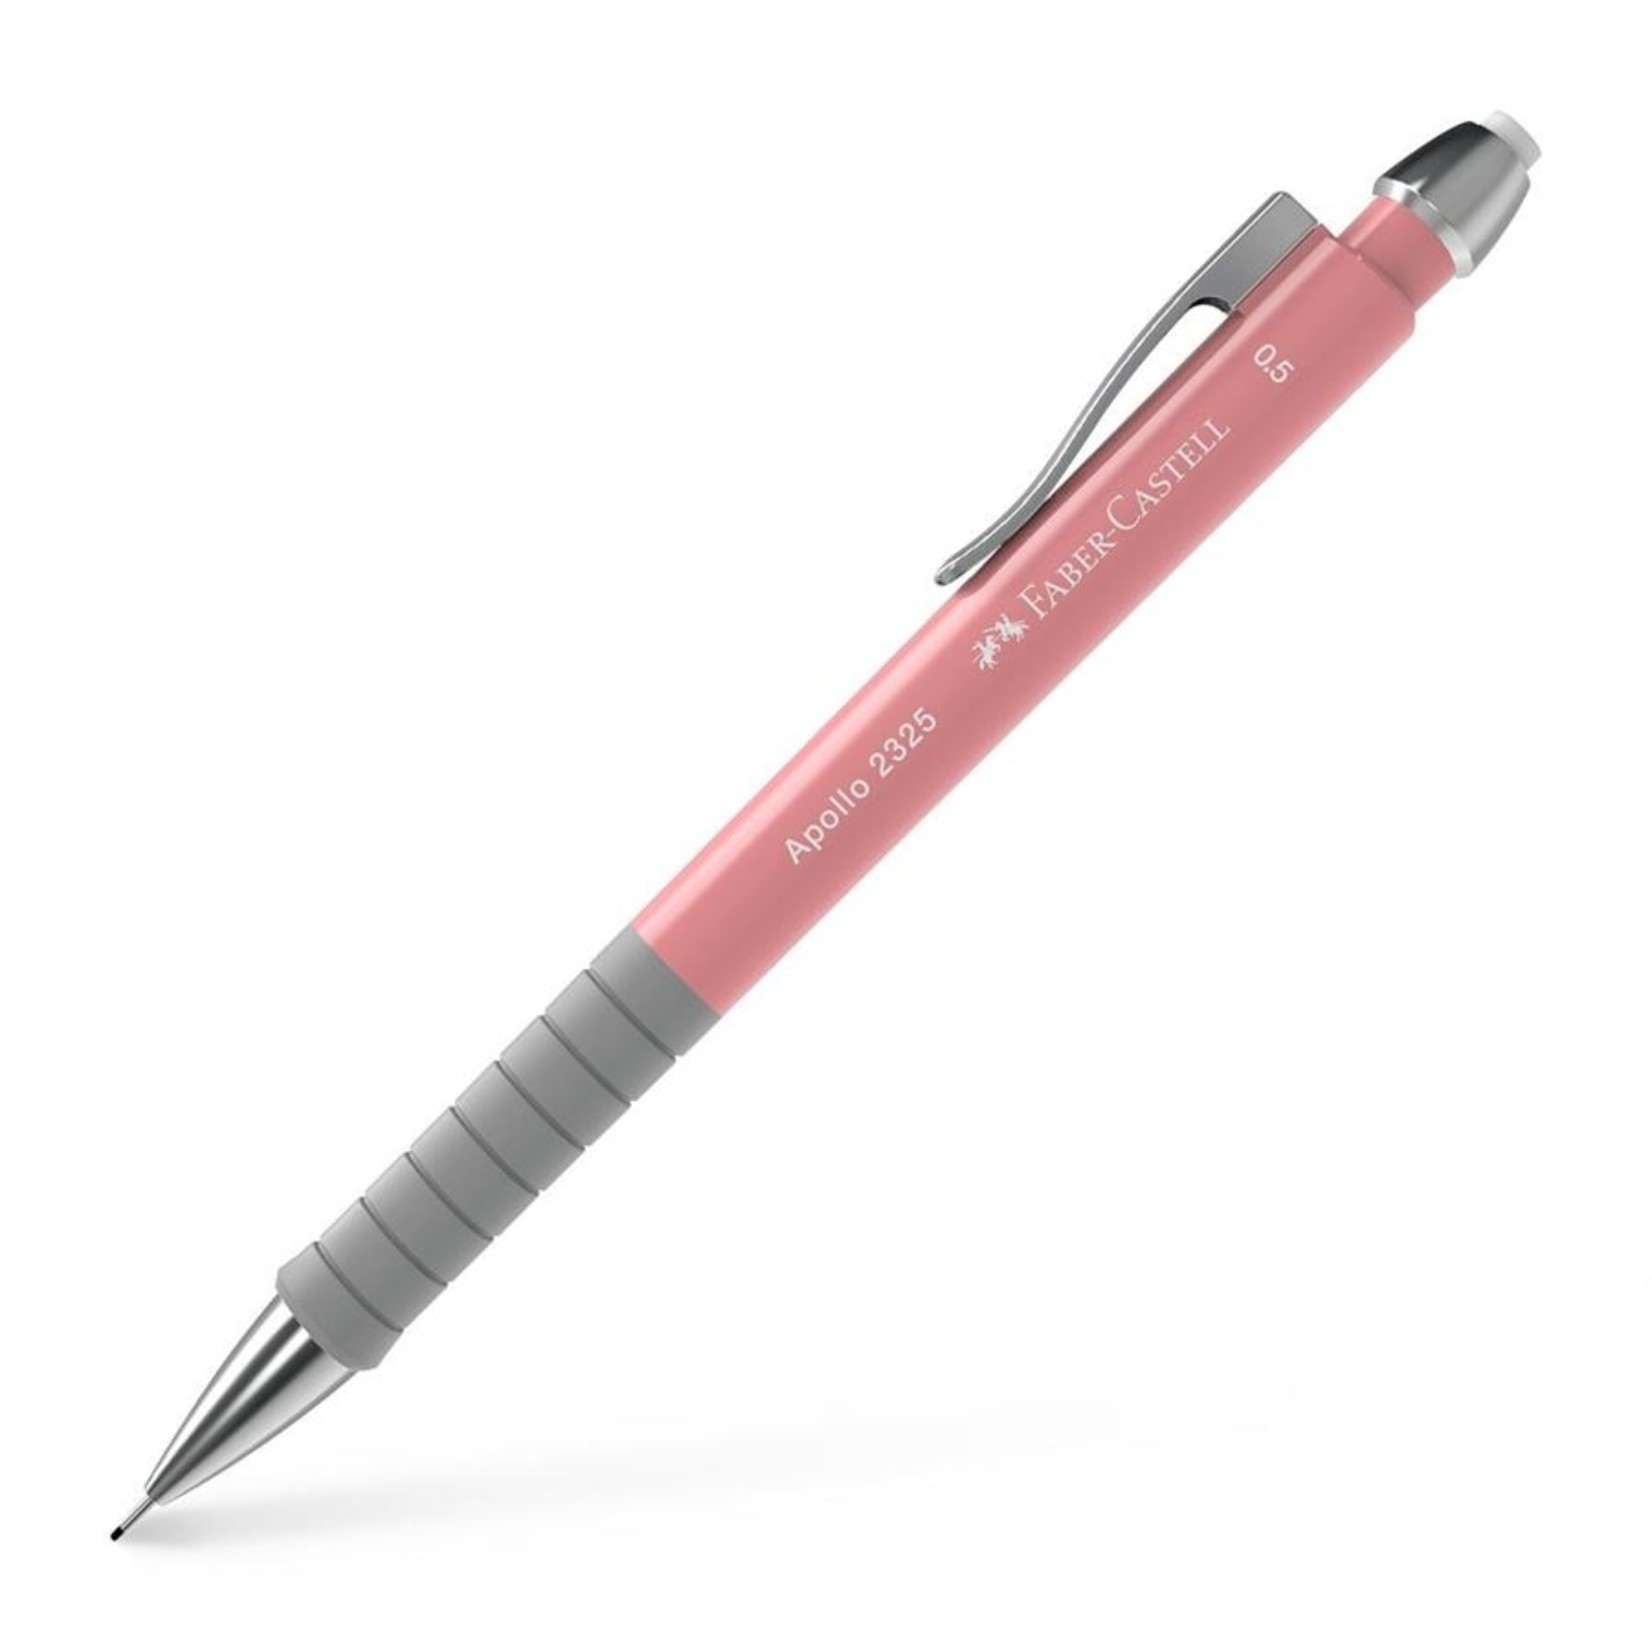 FABER CASTELL APOLLO MECHANICAL PENCIL 0.5MM ROSE